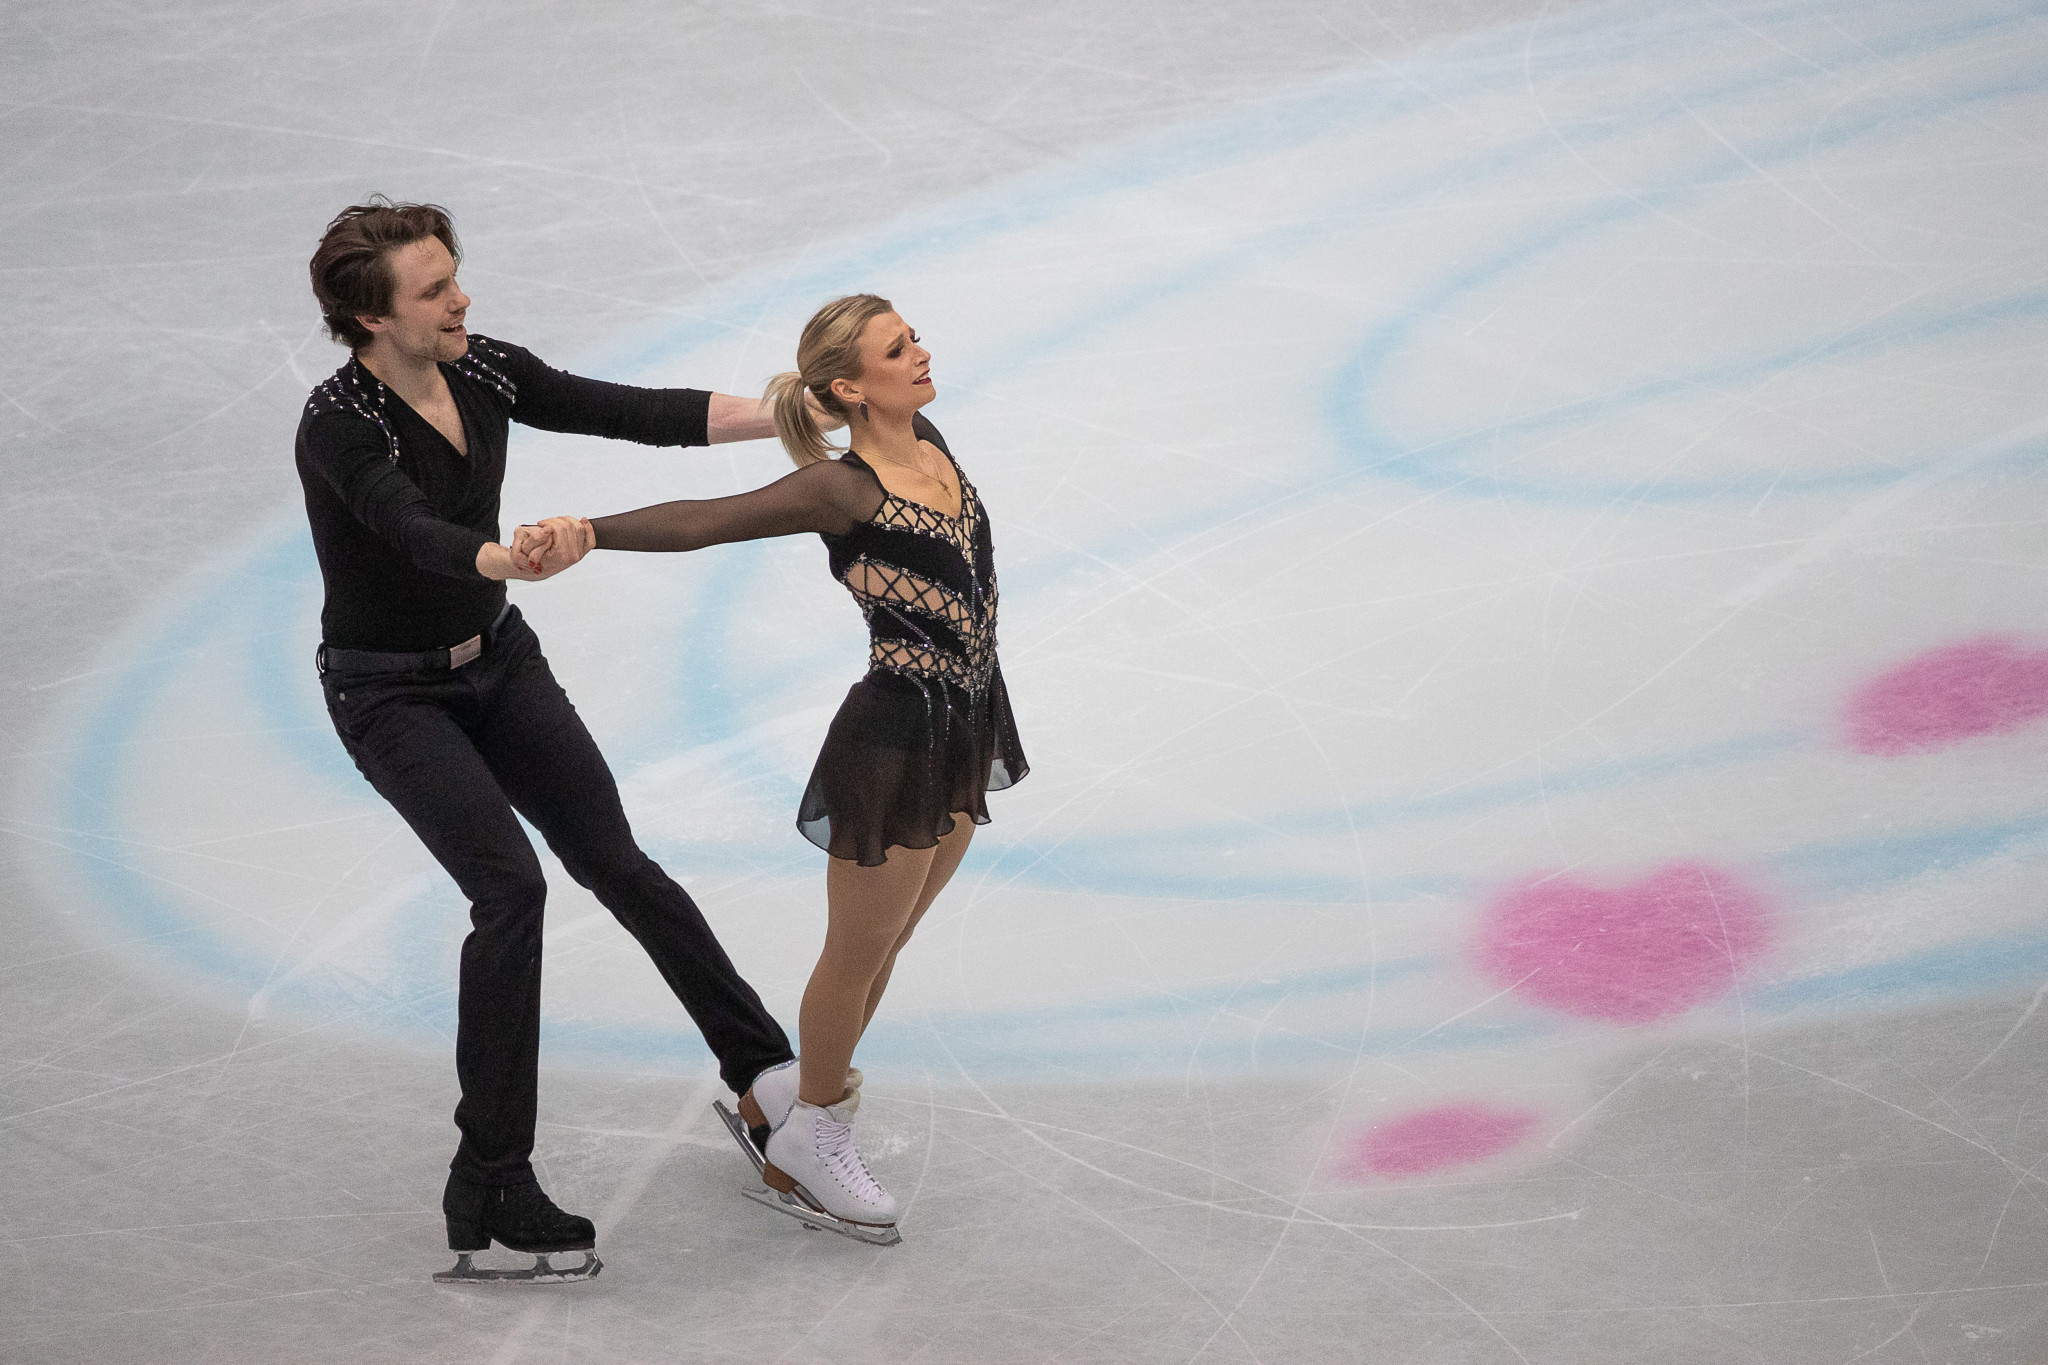 Tickets for 2019 Skate Canada International on general sale tomorrow